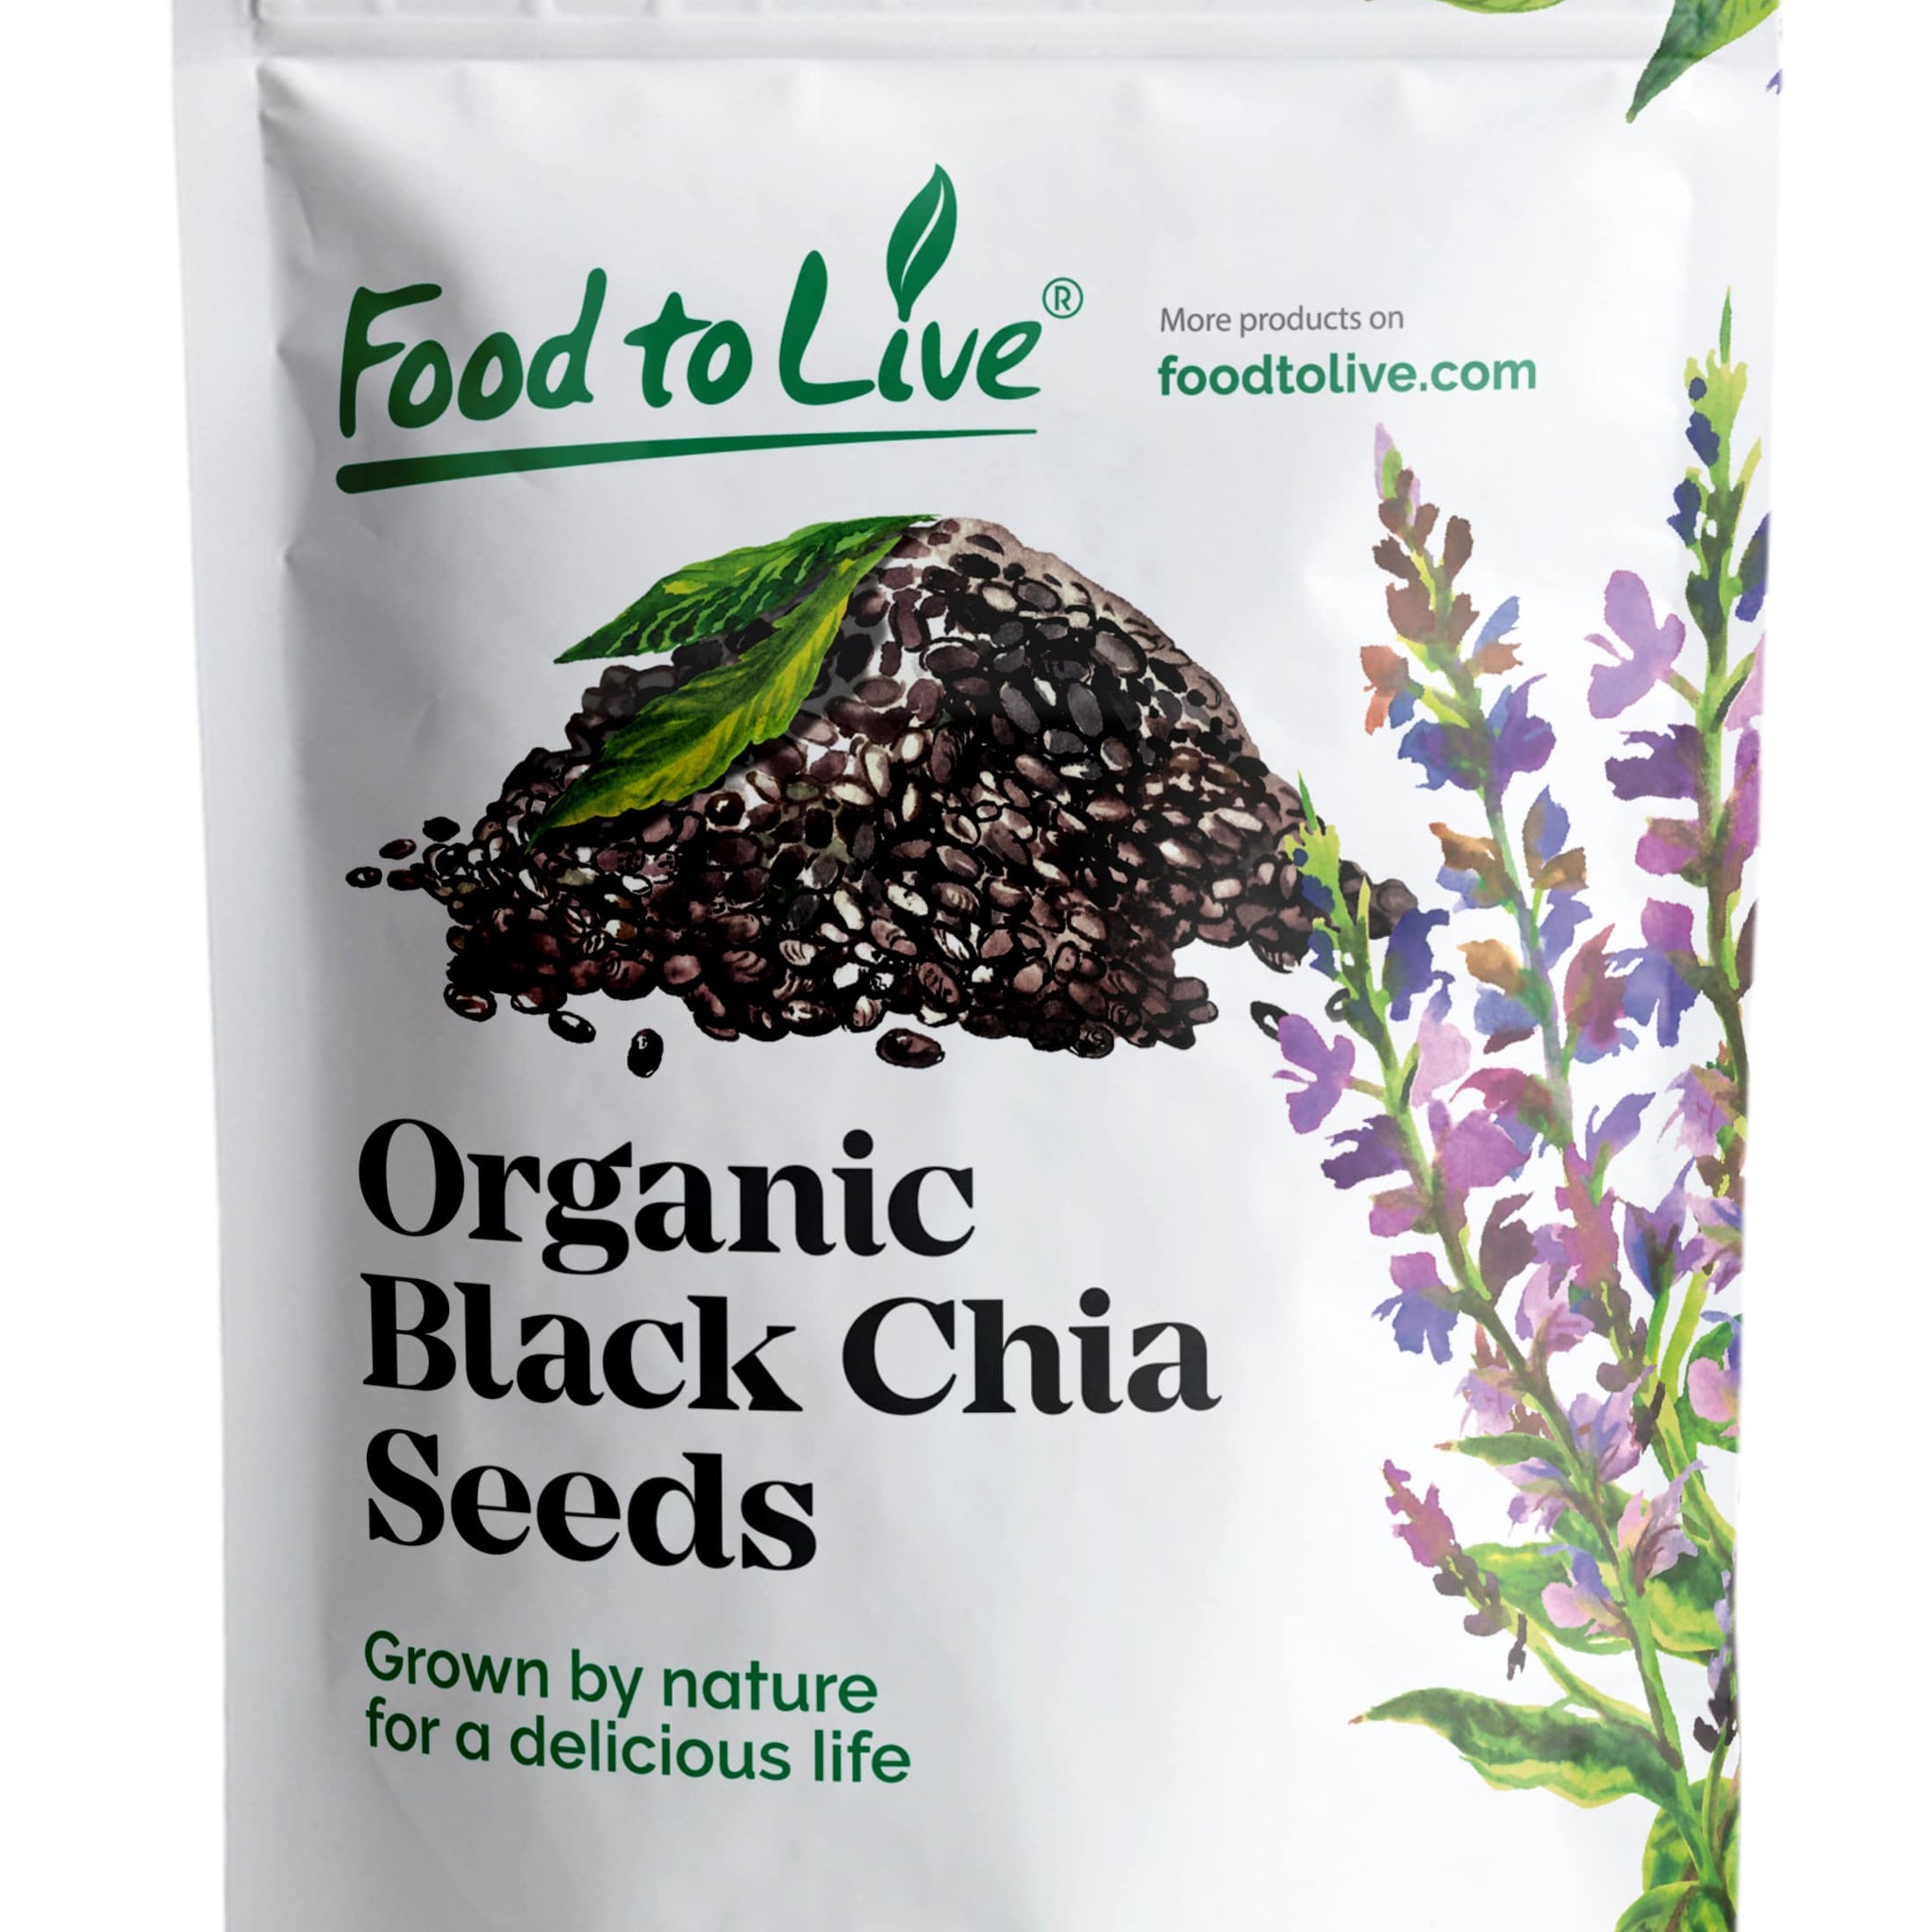 Organic Chia Seeds- Black, Vegan, Kosher, Non-GMO, Great for Smoothies, Sirtfood - by Food to Live